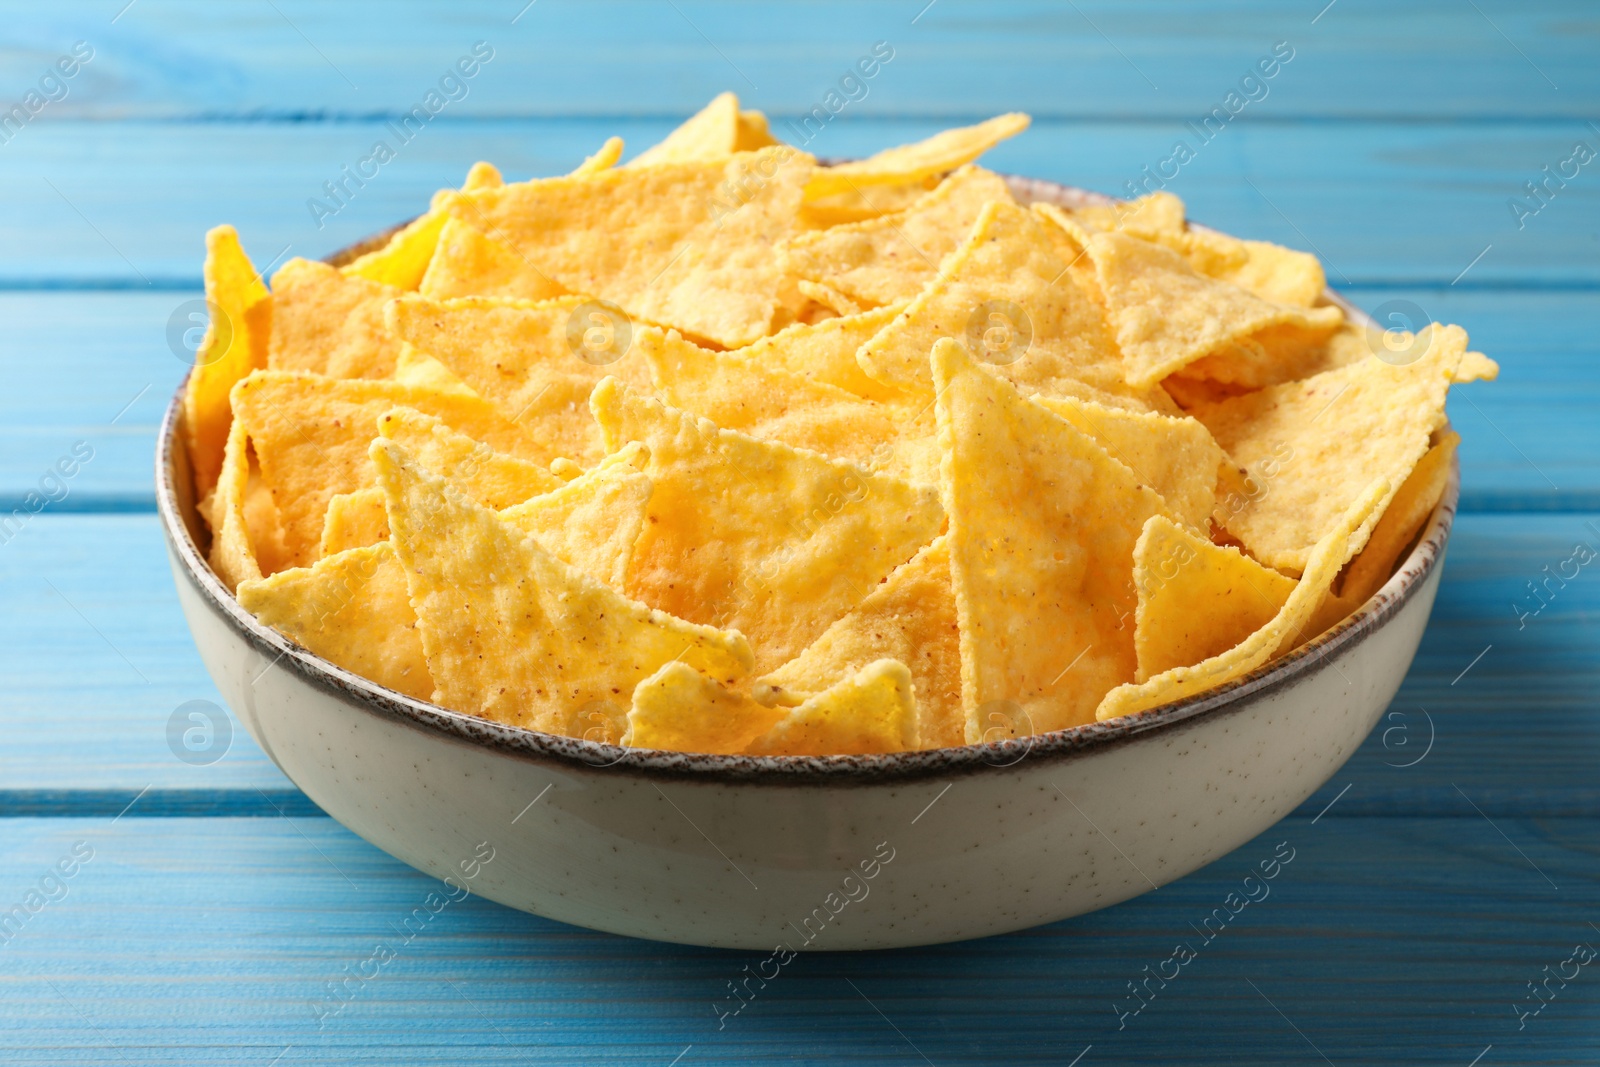 Photo of Tortilla chips (nachos) in bowl on light blue wooden table, closeup